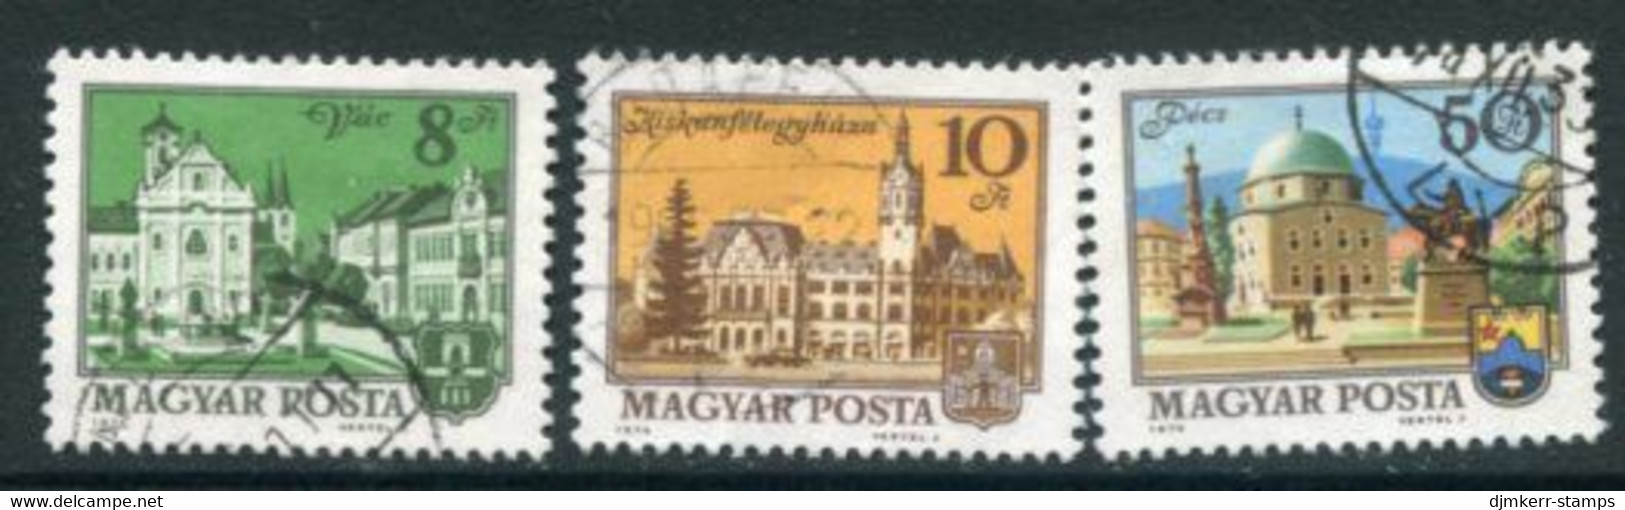 HUNGARY 1974 Towns Definitive 8, 10, 50 Ft. Used.  Michel 3001-003 - Gebruikt